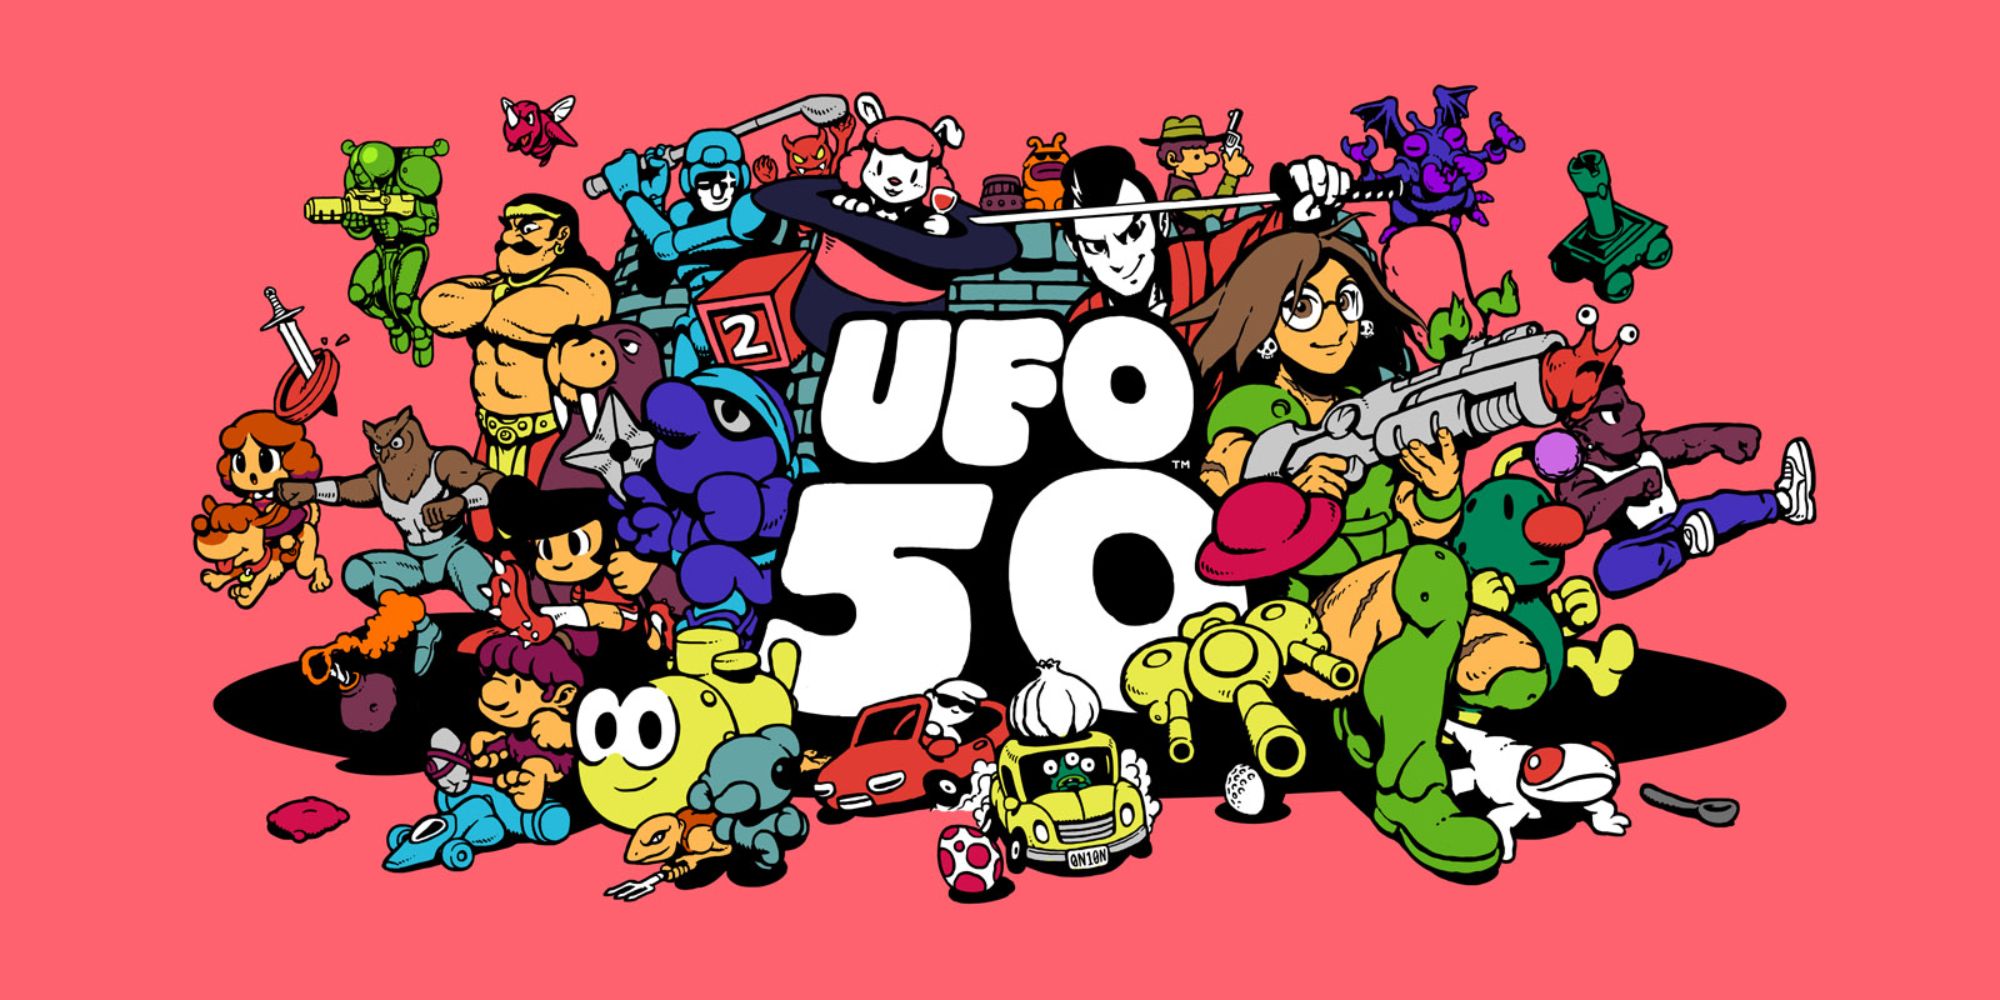 Promotional art for UFO 50 featuring the cast of characters